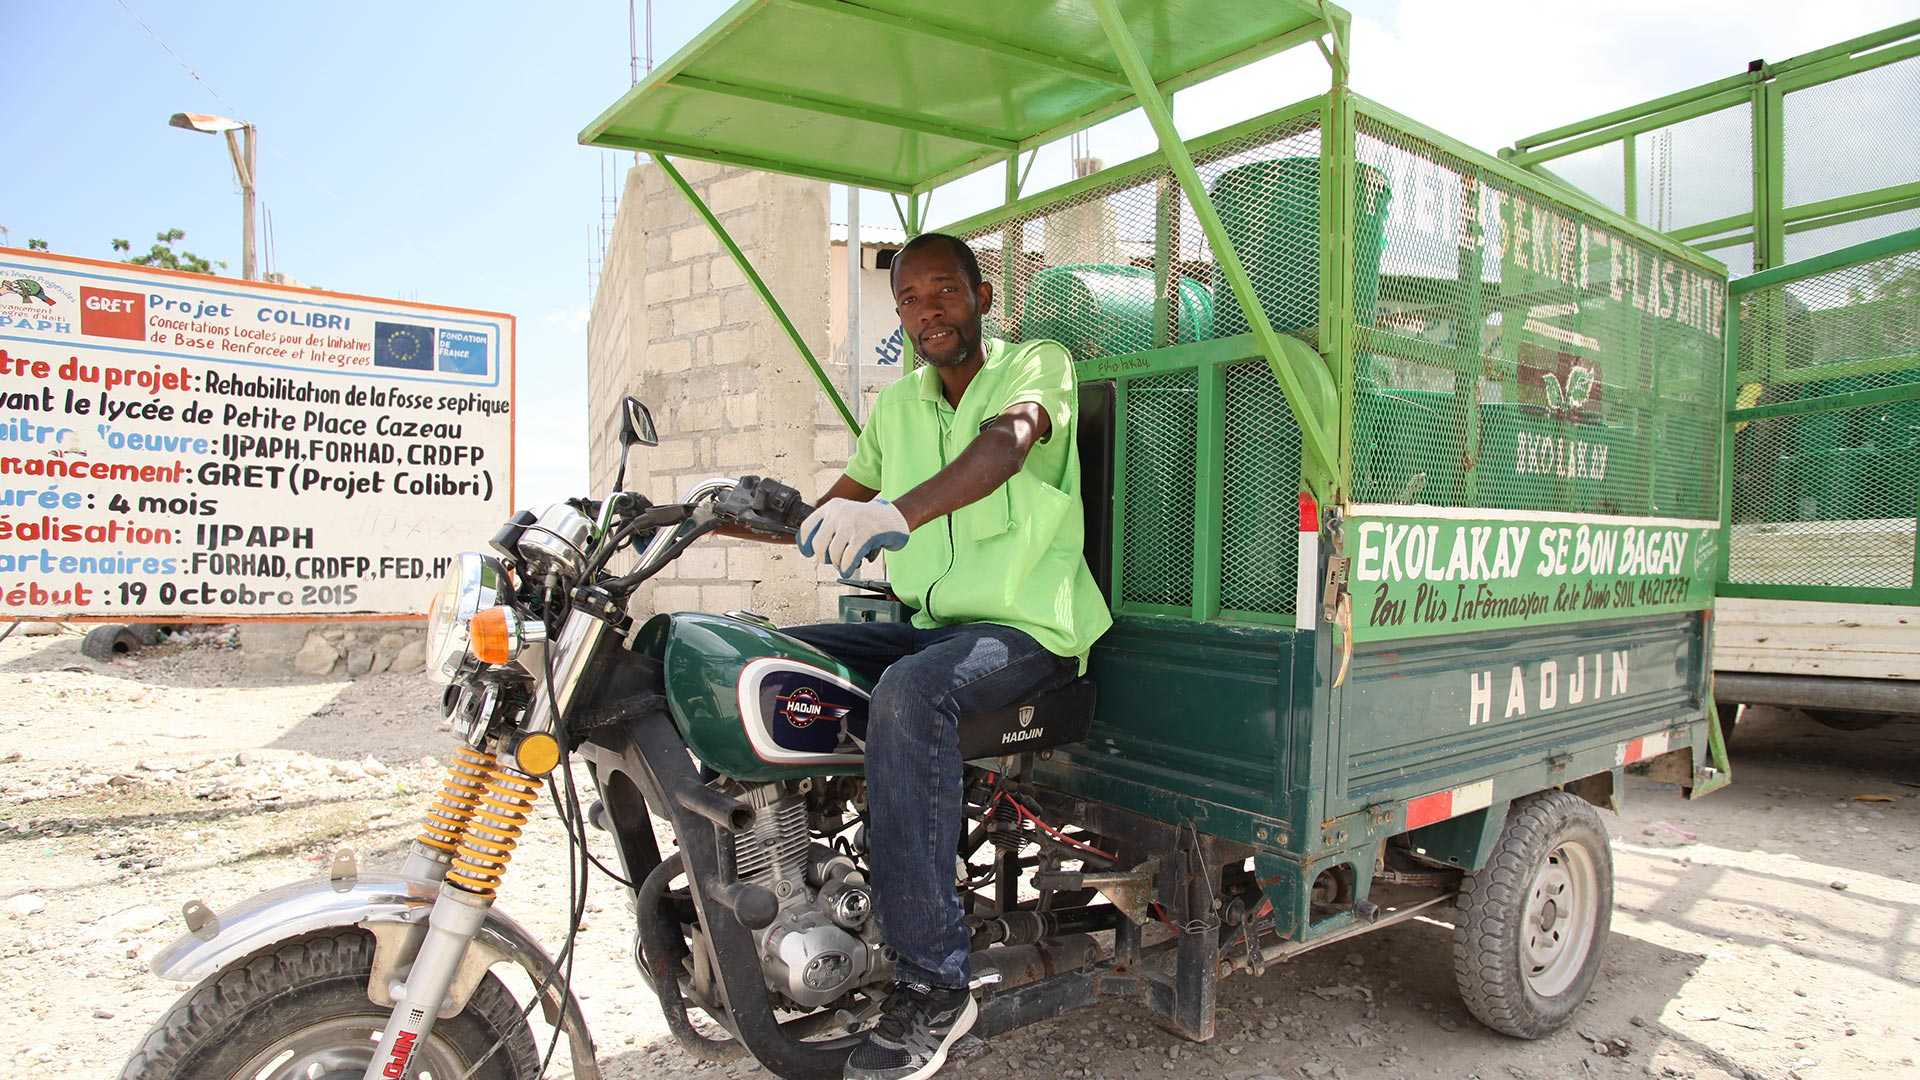 A man driving a vehicle carrying waste collected from homes in Haiti to be turned into compost